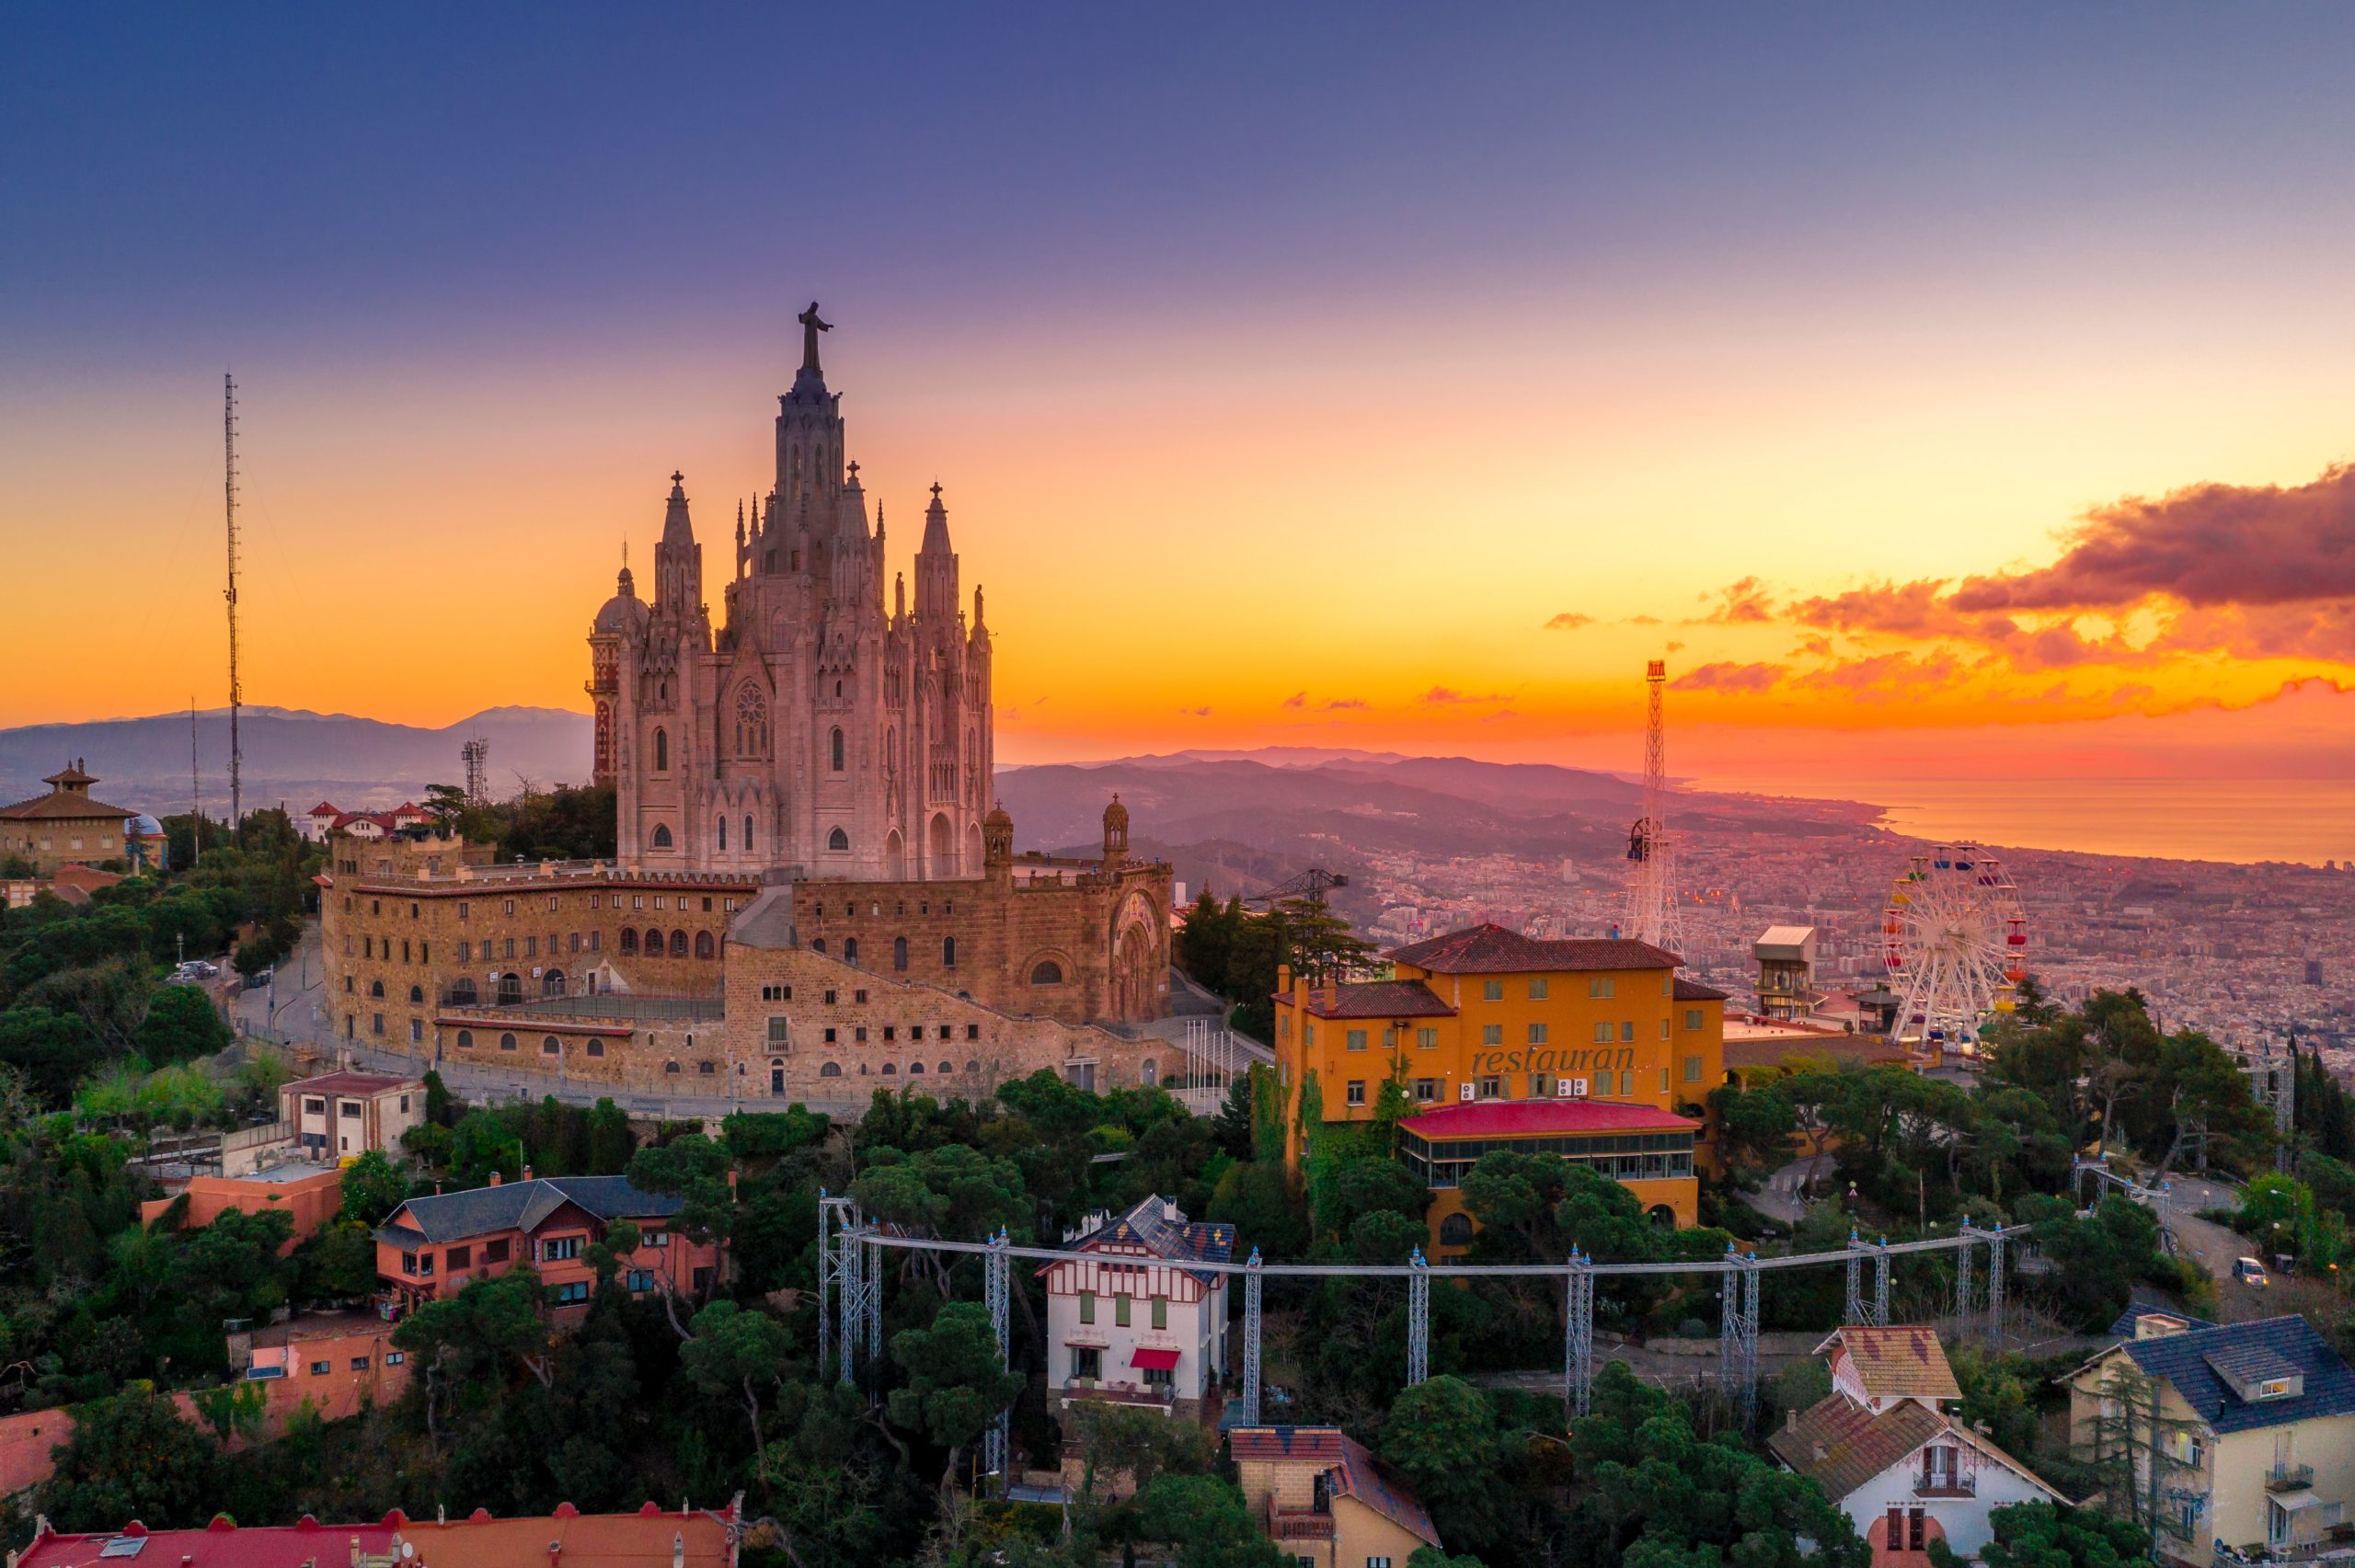 A spectacular sunset over a historical city photographed by an person teaching English abroad in Spain